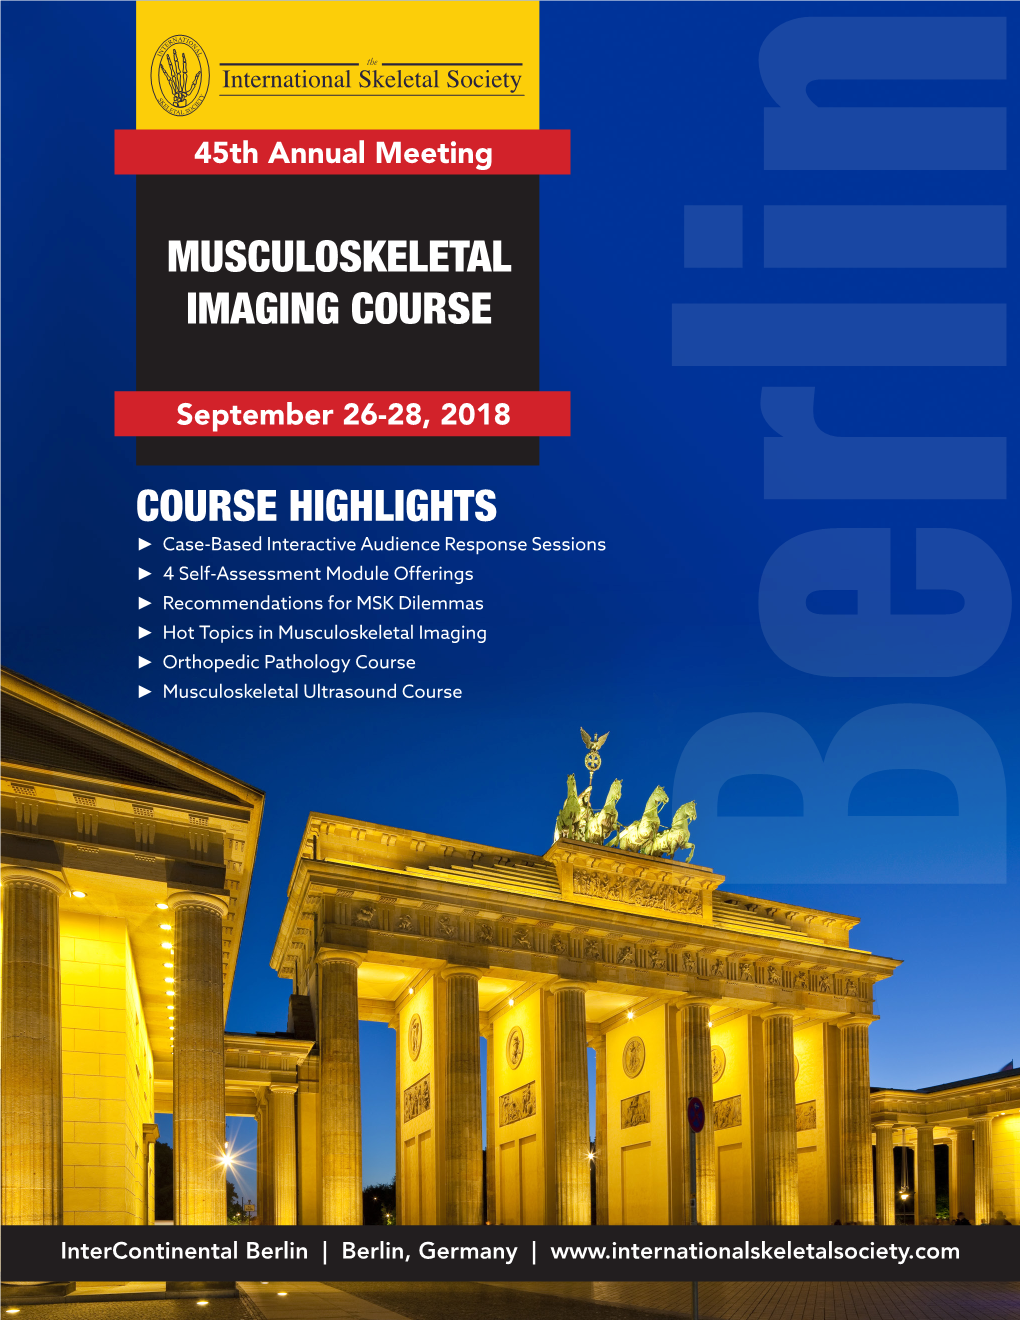 Musculoskeletal Imaging Course Course Highlights